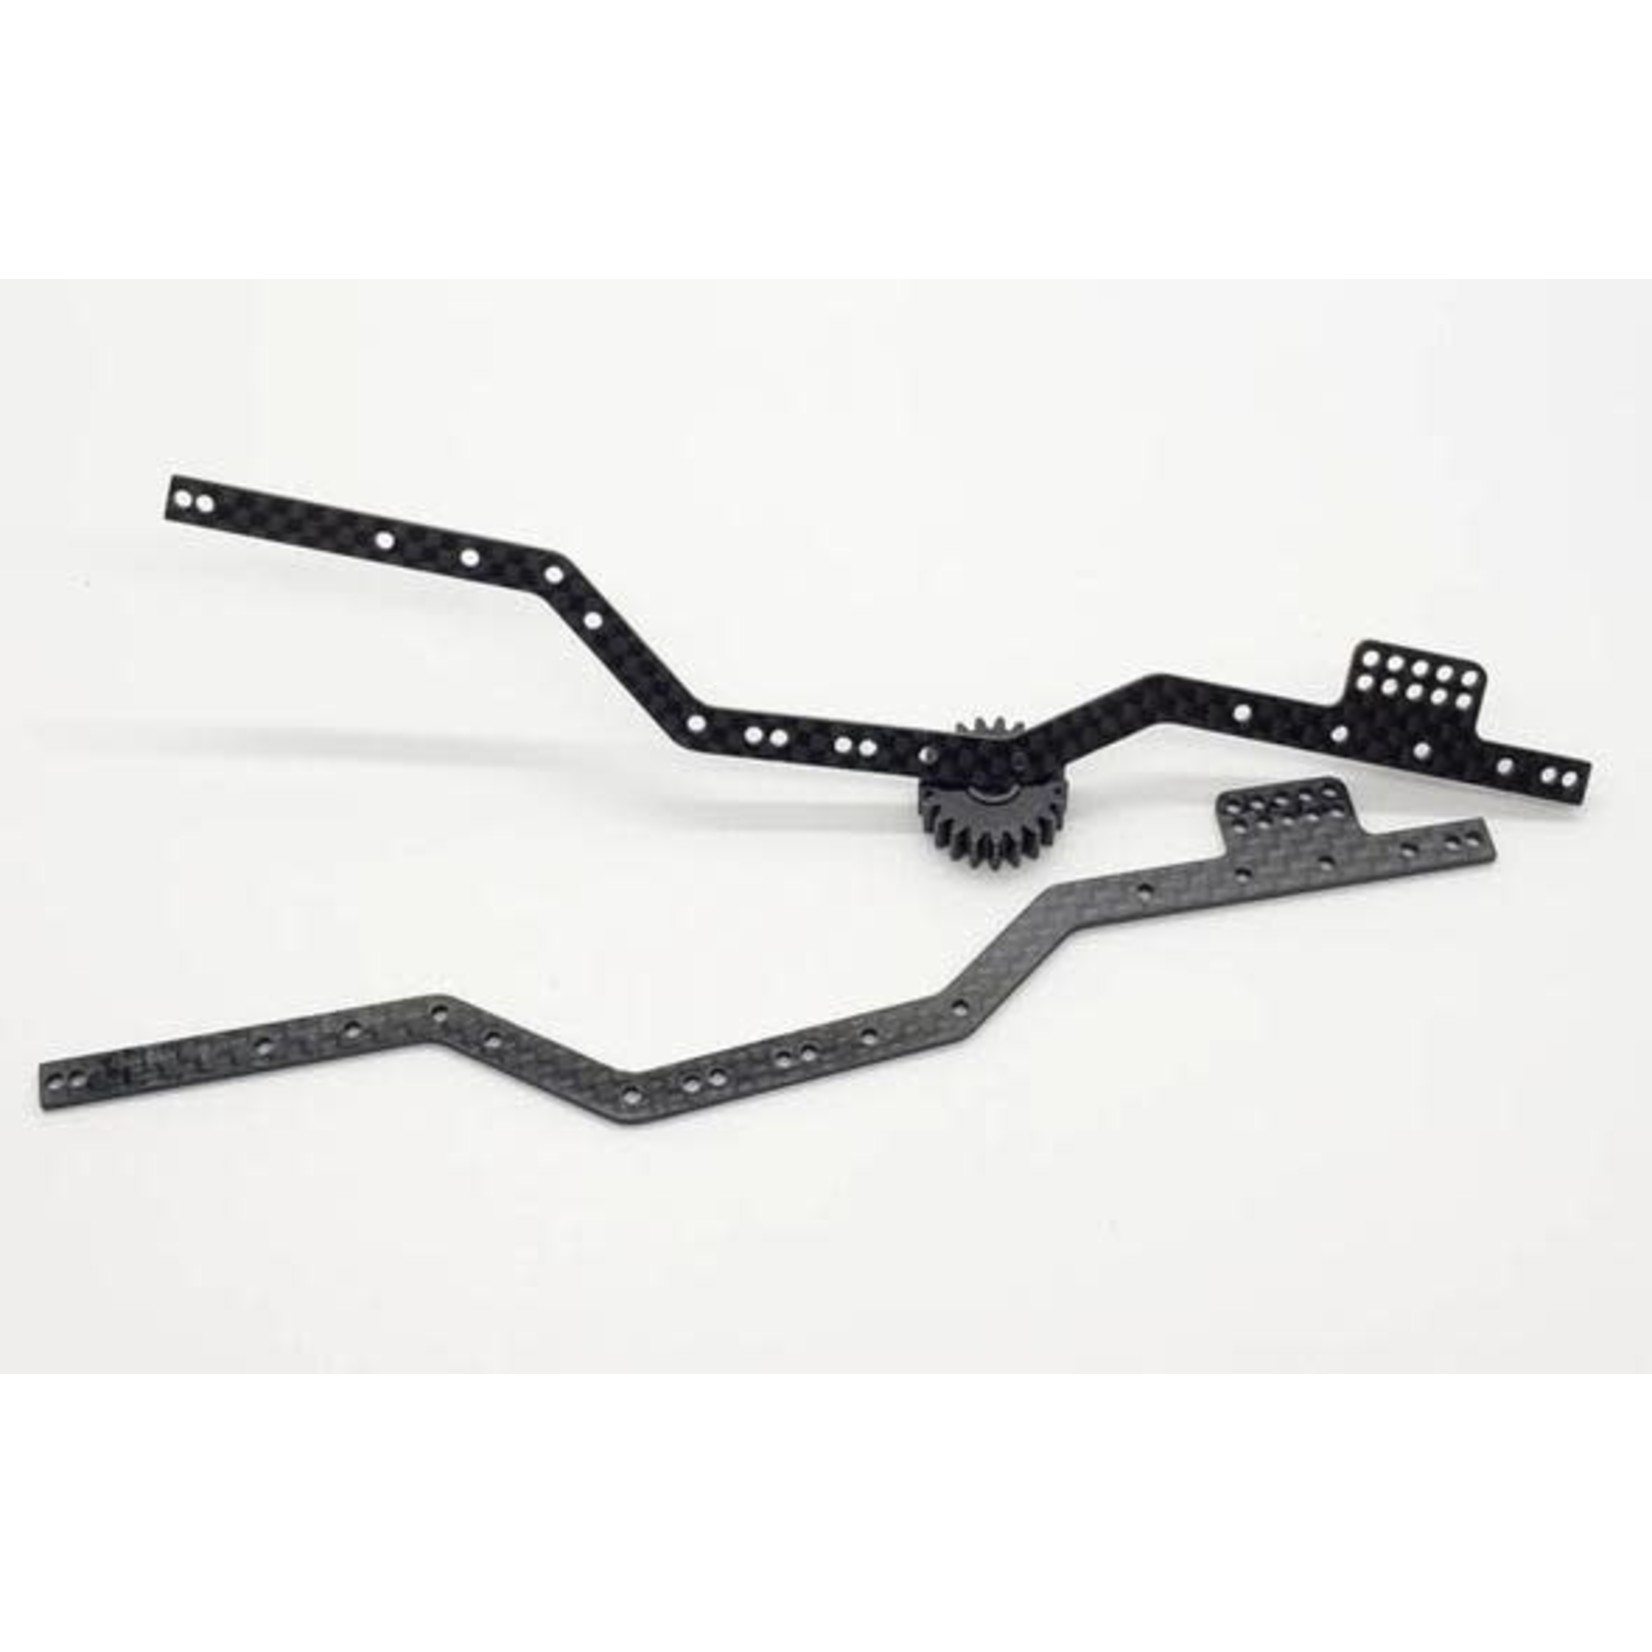 Team G-Speed G Speed GH-24X Performance Chassis for your Axial SCX24 #9092